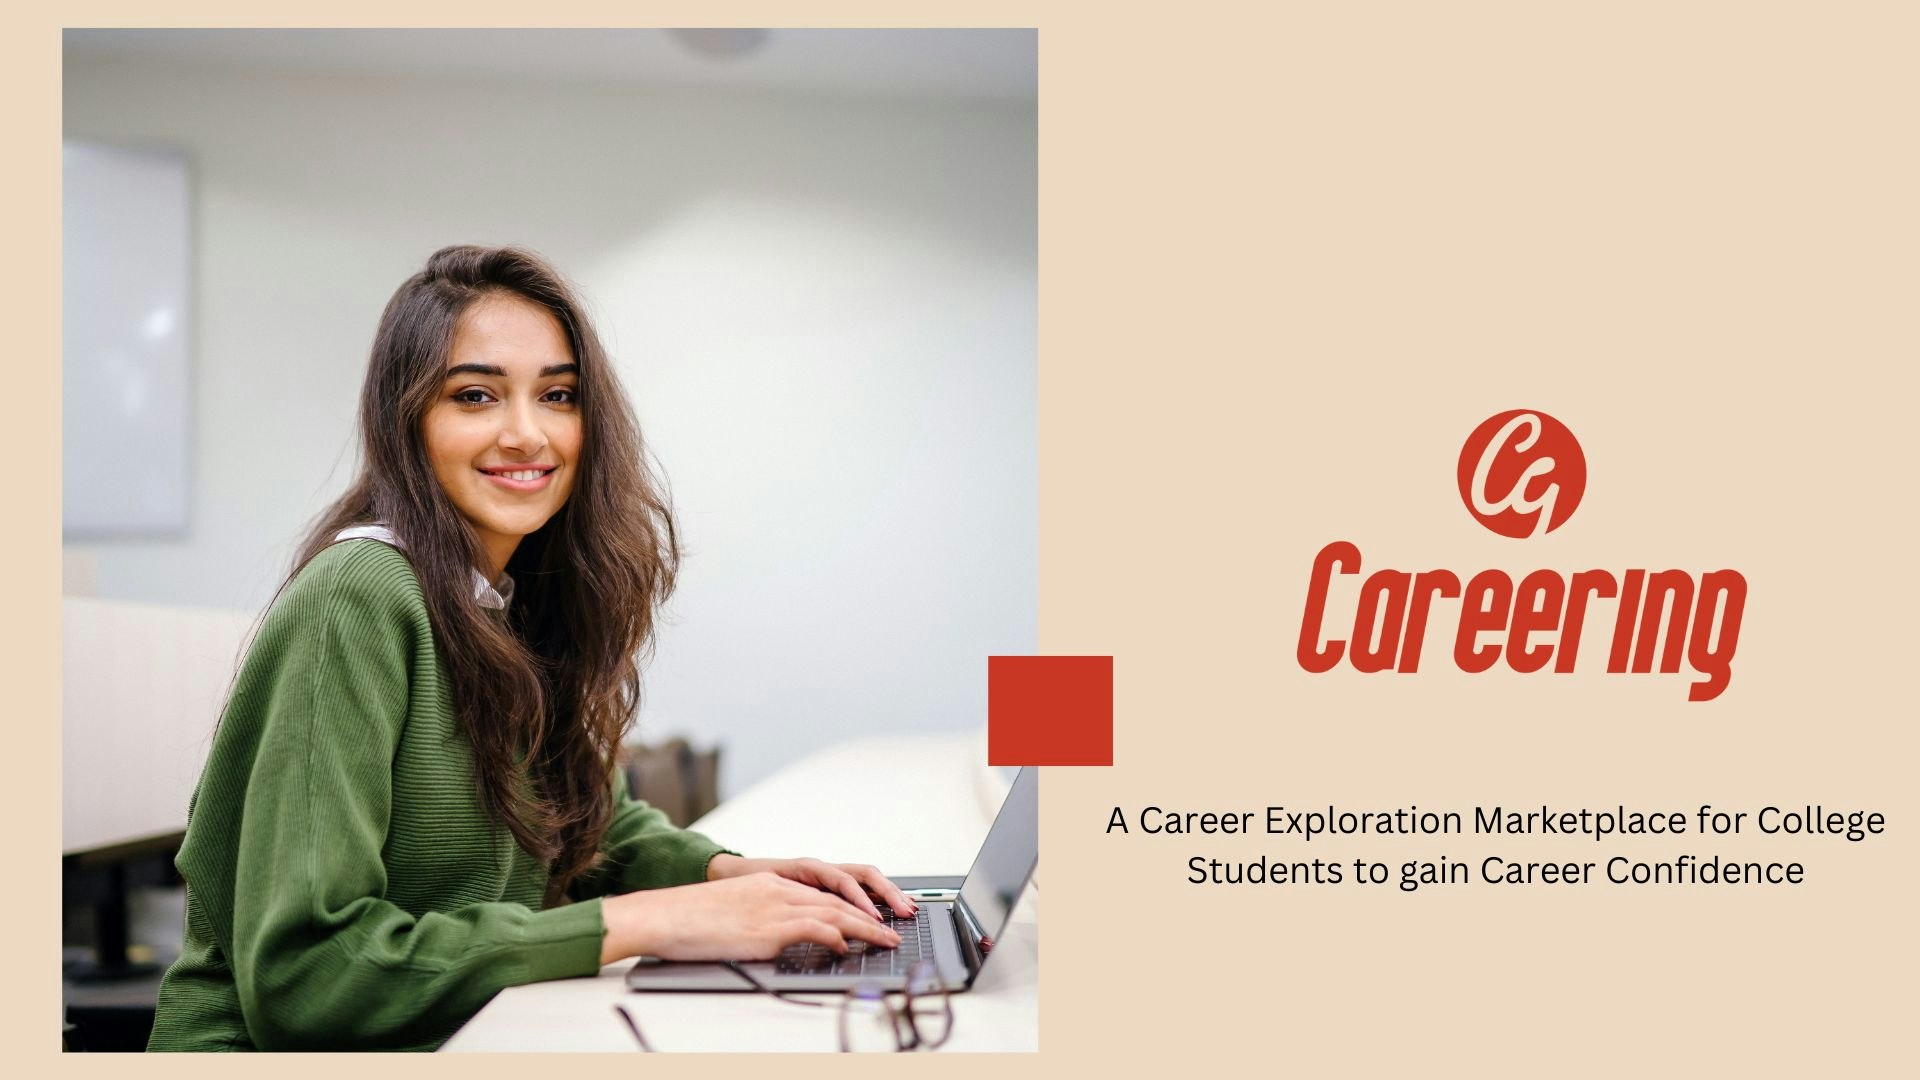 careering - The Career Exploration Platform for College Students